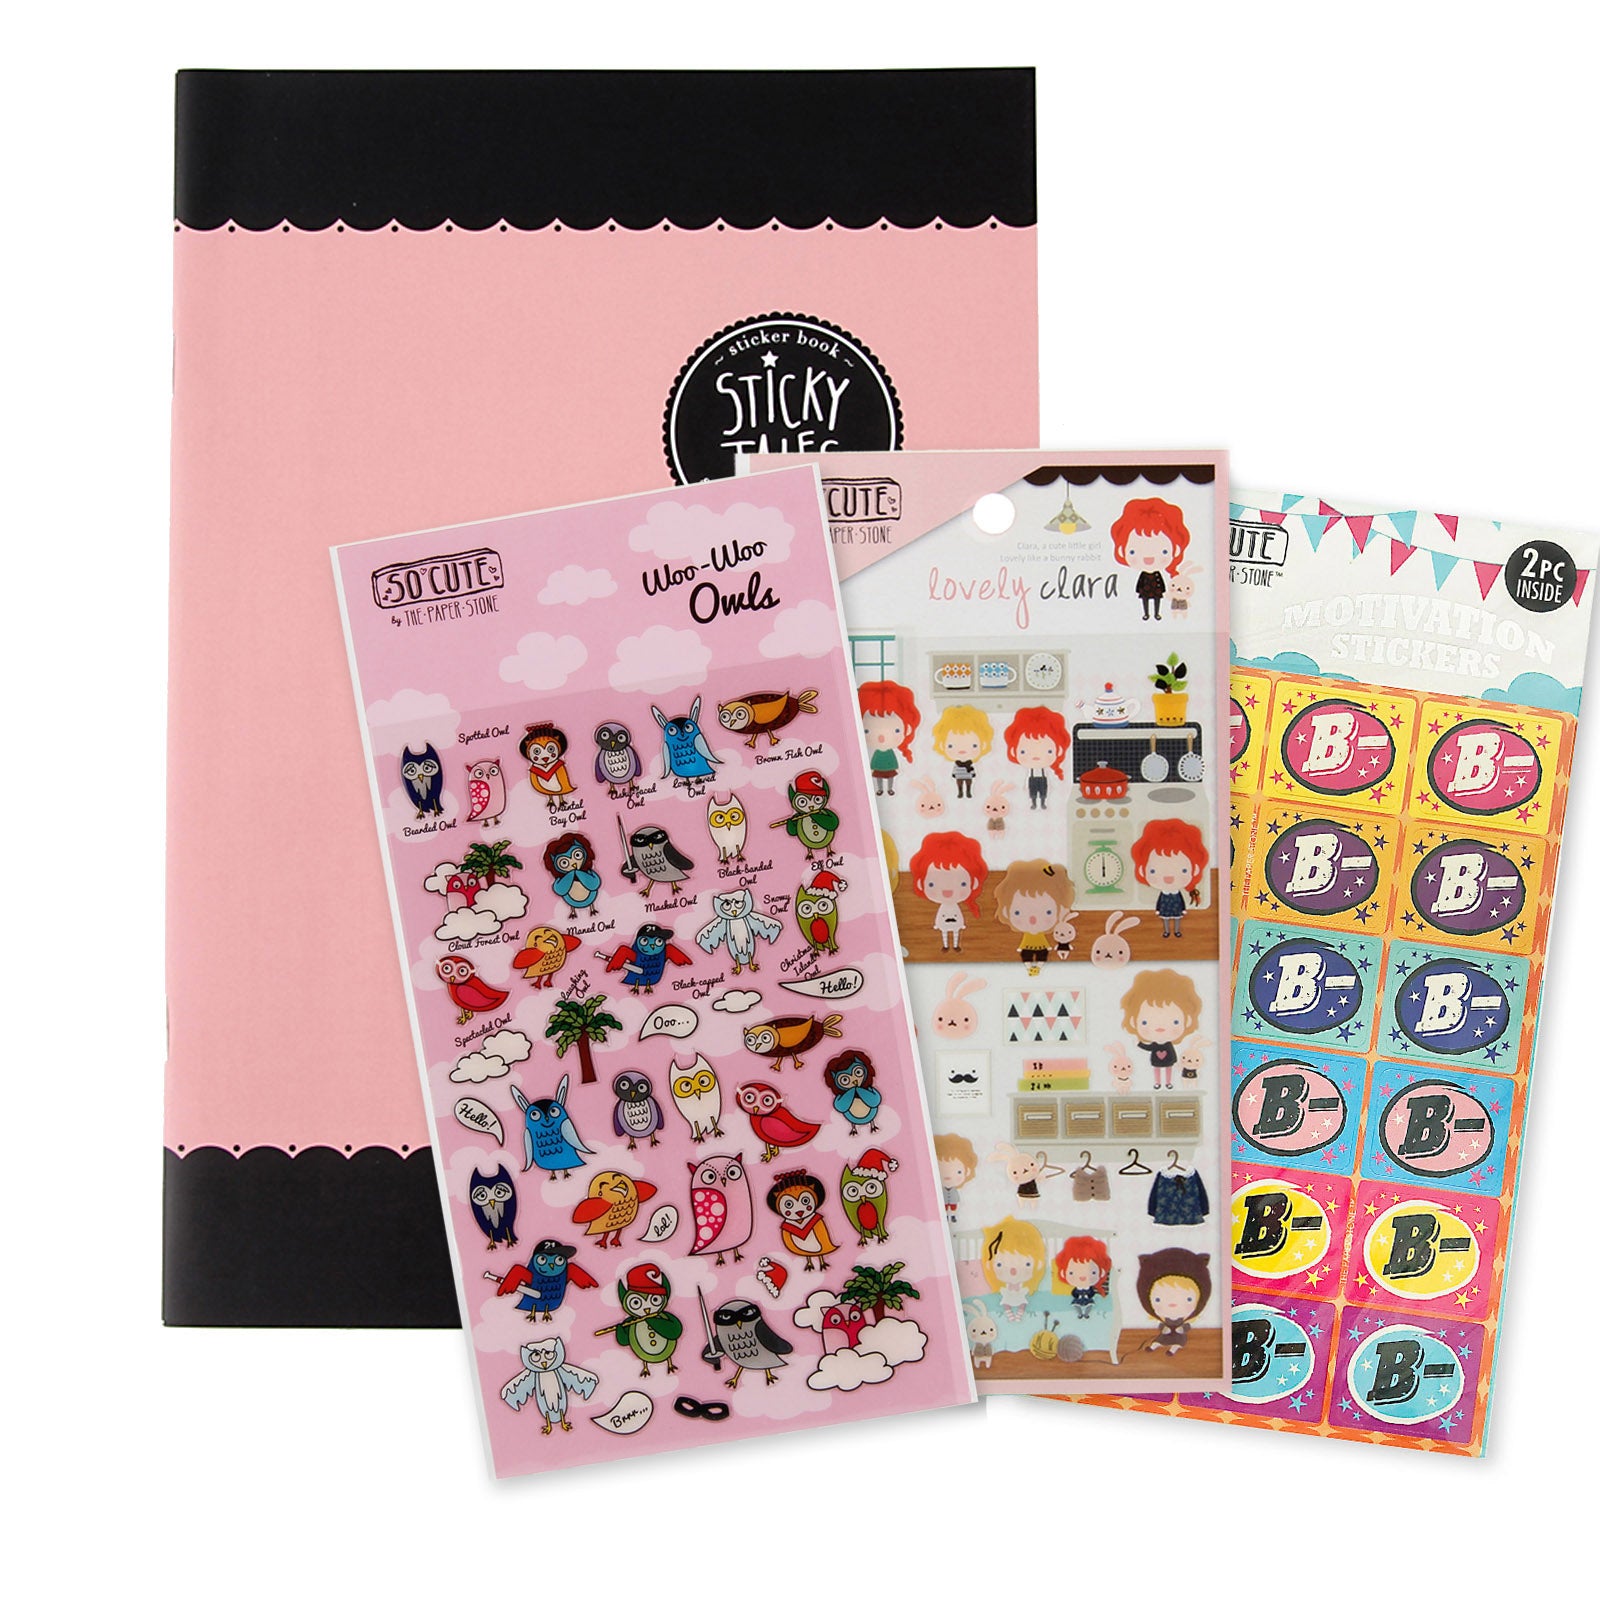 Sticky Tales Set - Pink Scallop Sticker Book With 3 Sticker Packs